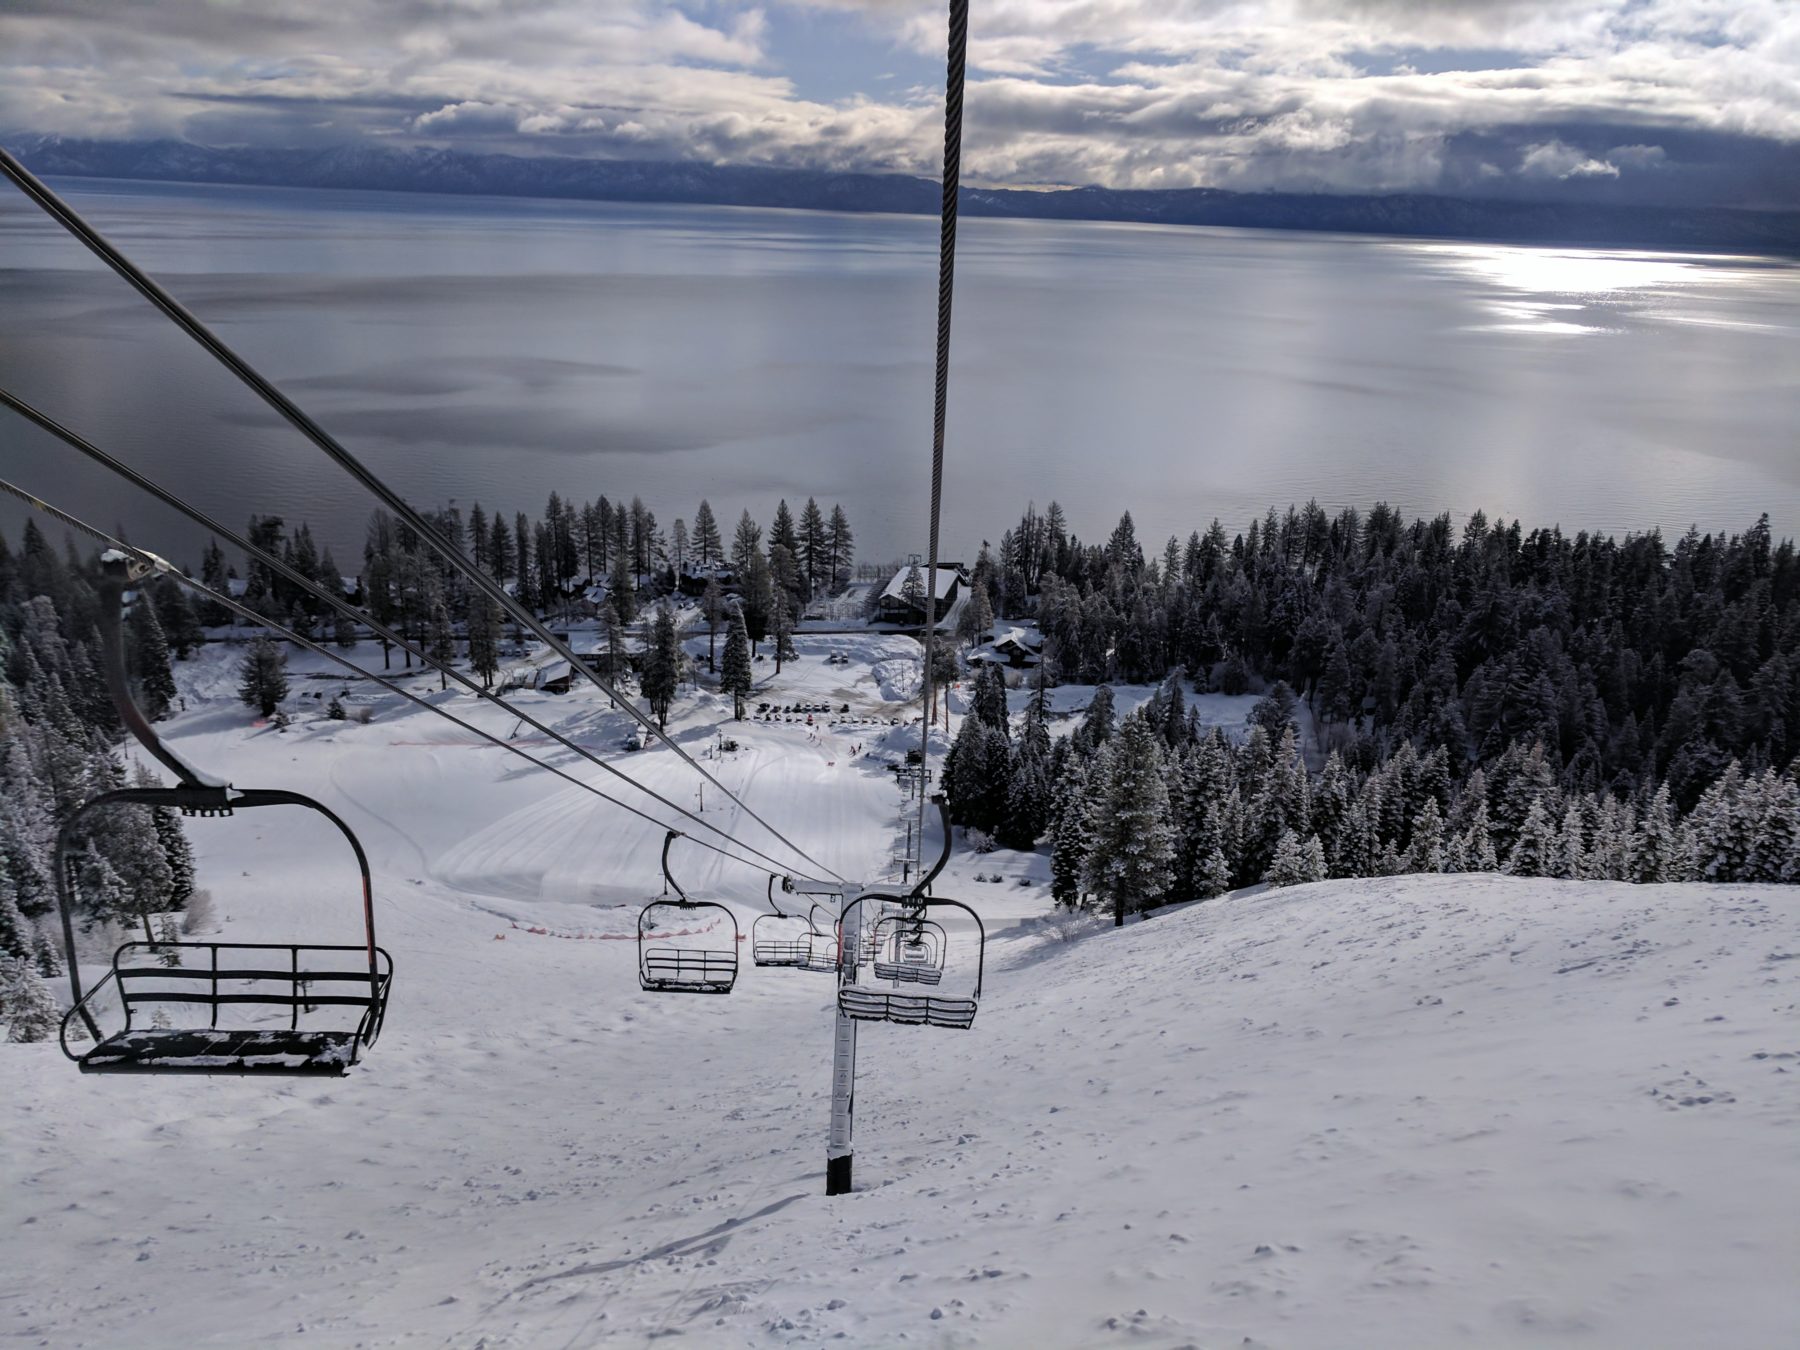 Chairlift overlooking a large alpine lake in the winter